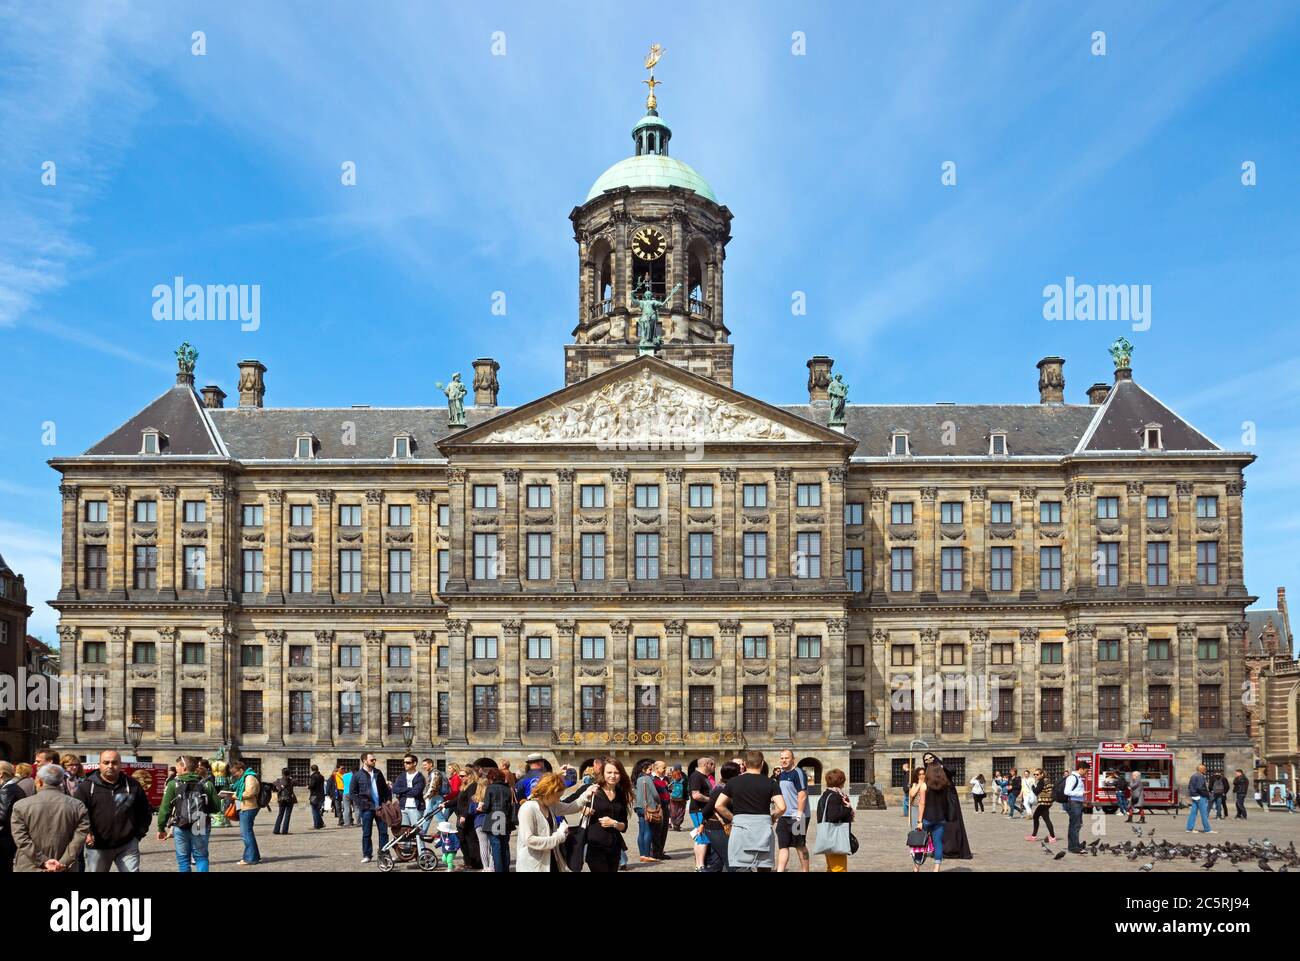 AMSTERDAM, NETHERLANDS - MAY 30: The Royal Palace at the Dam Square on May 30, 2014 in Amsterdam, Netherlands. It was built as the Town Hall of the Ci Stock Photo